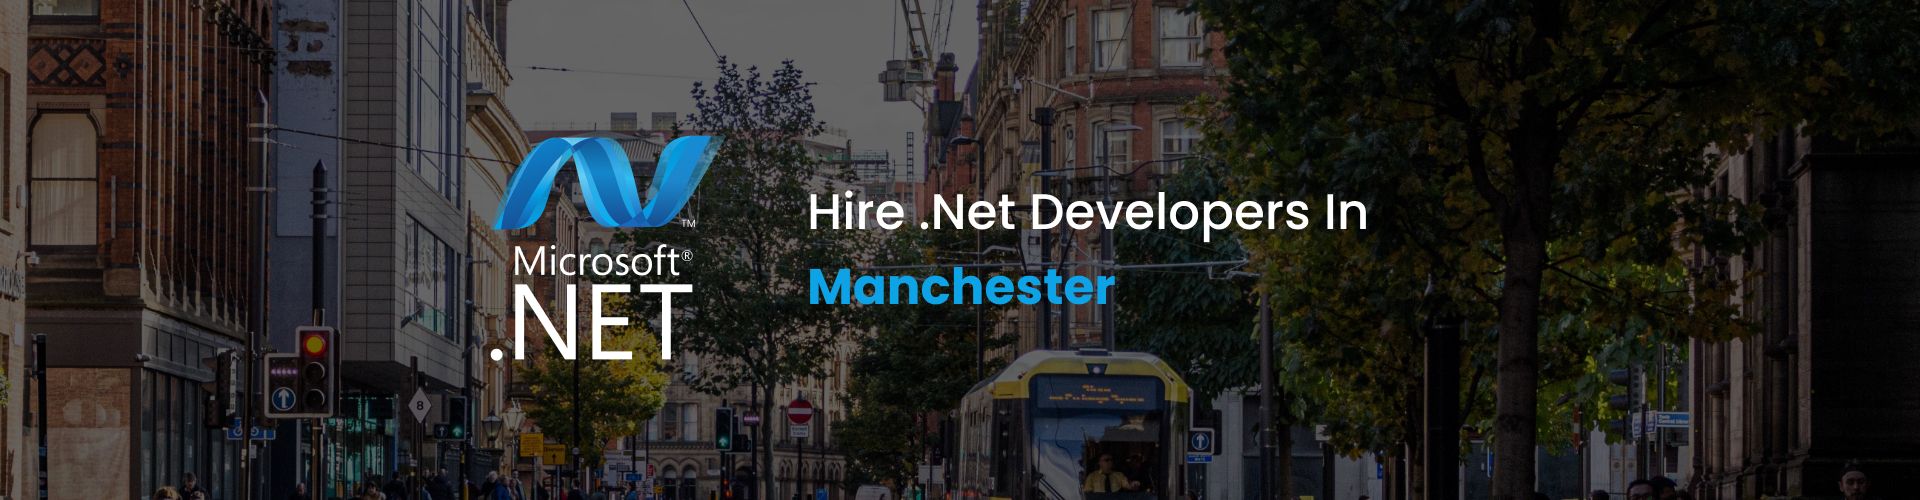 hire dot net developers in manchester